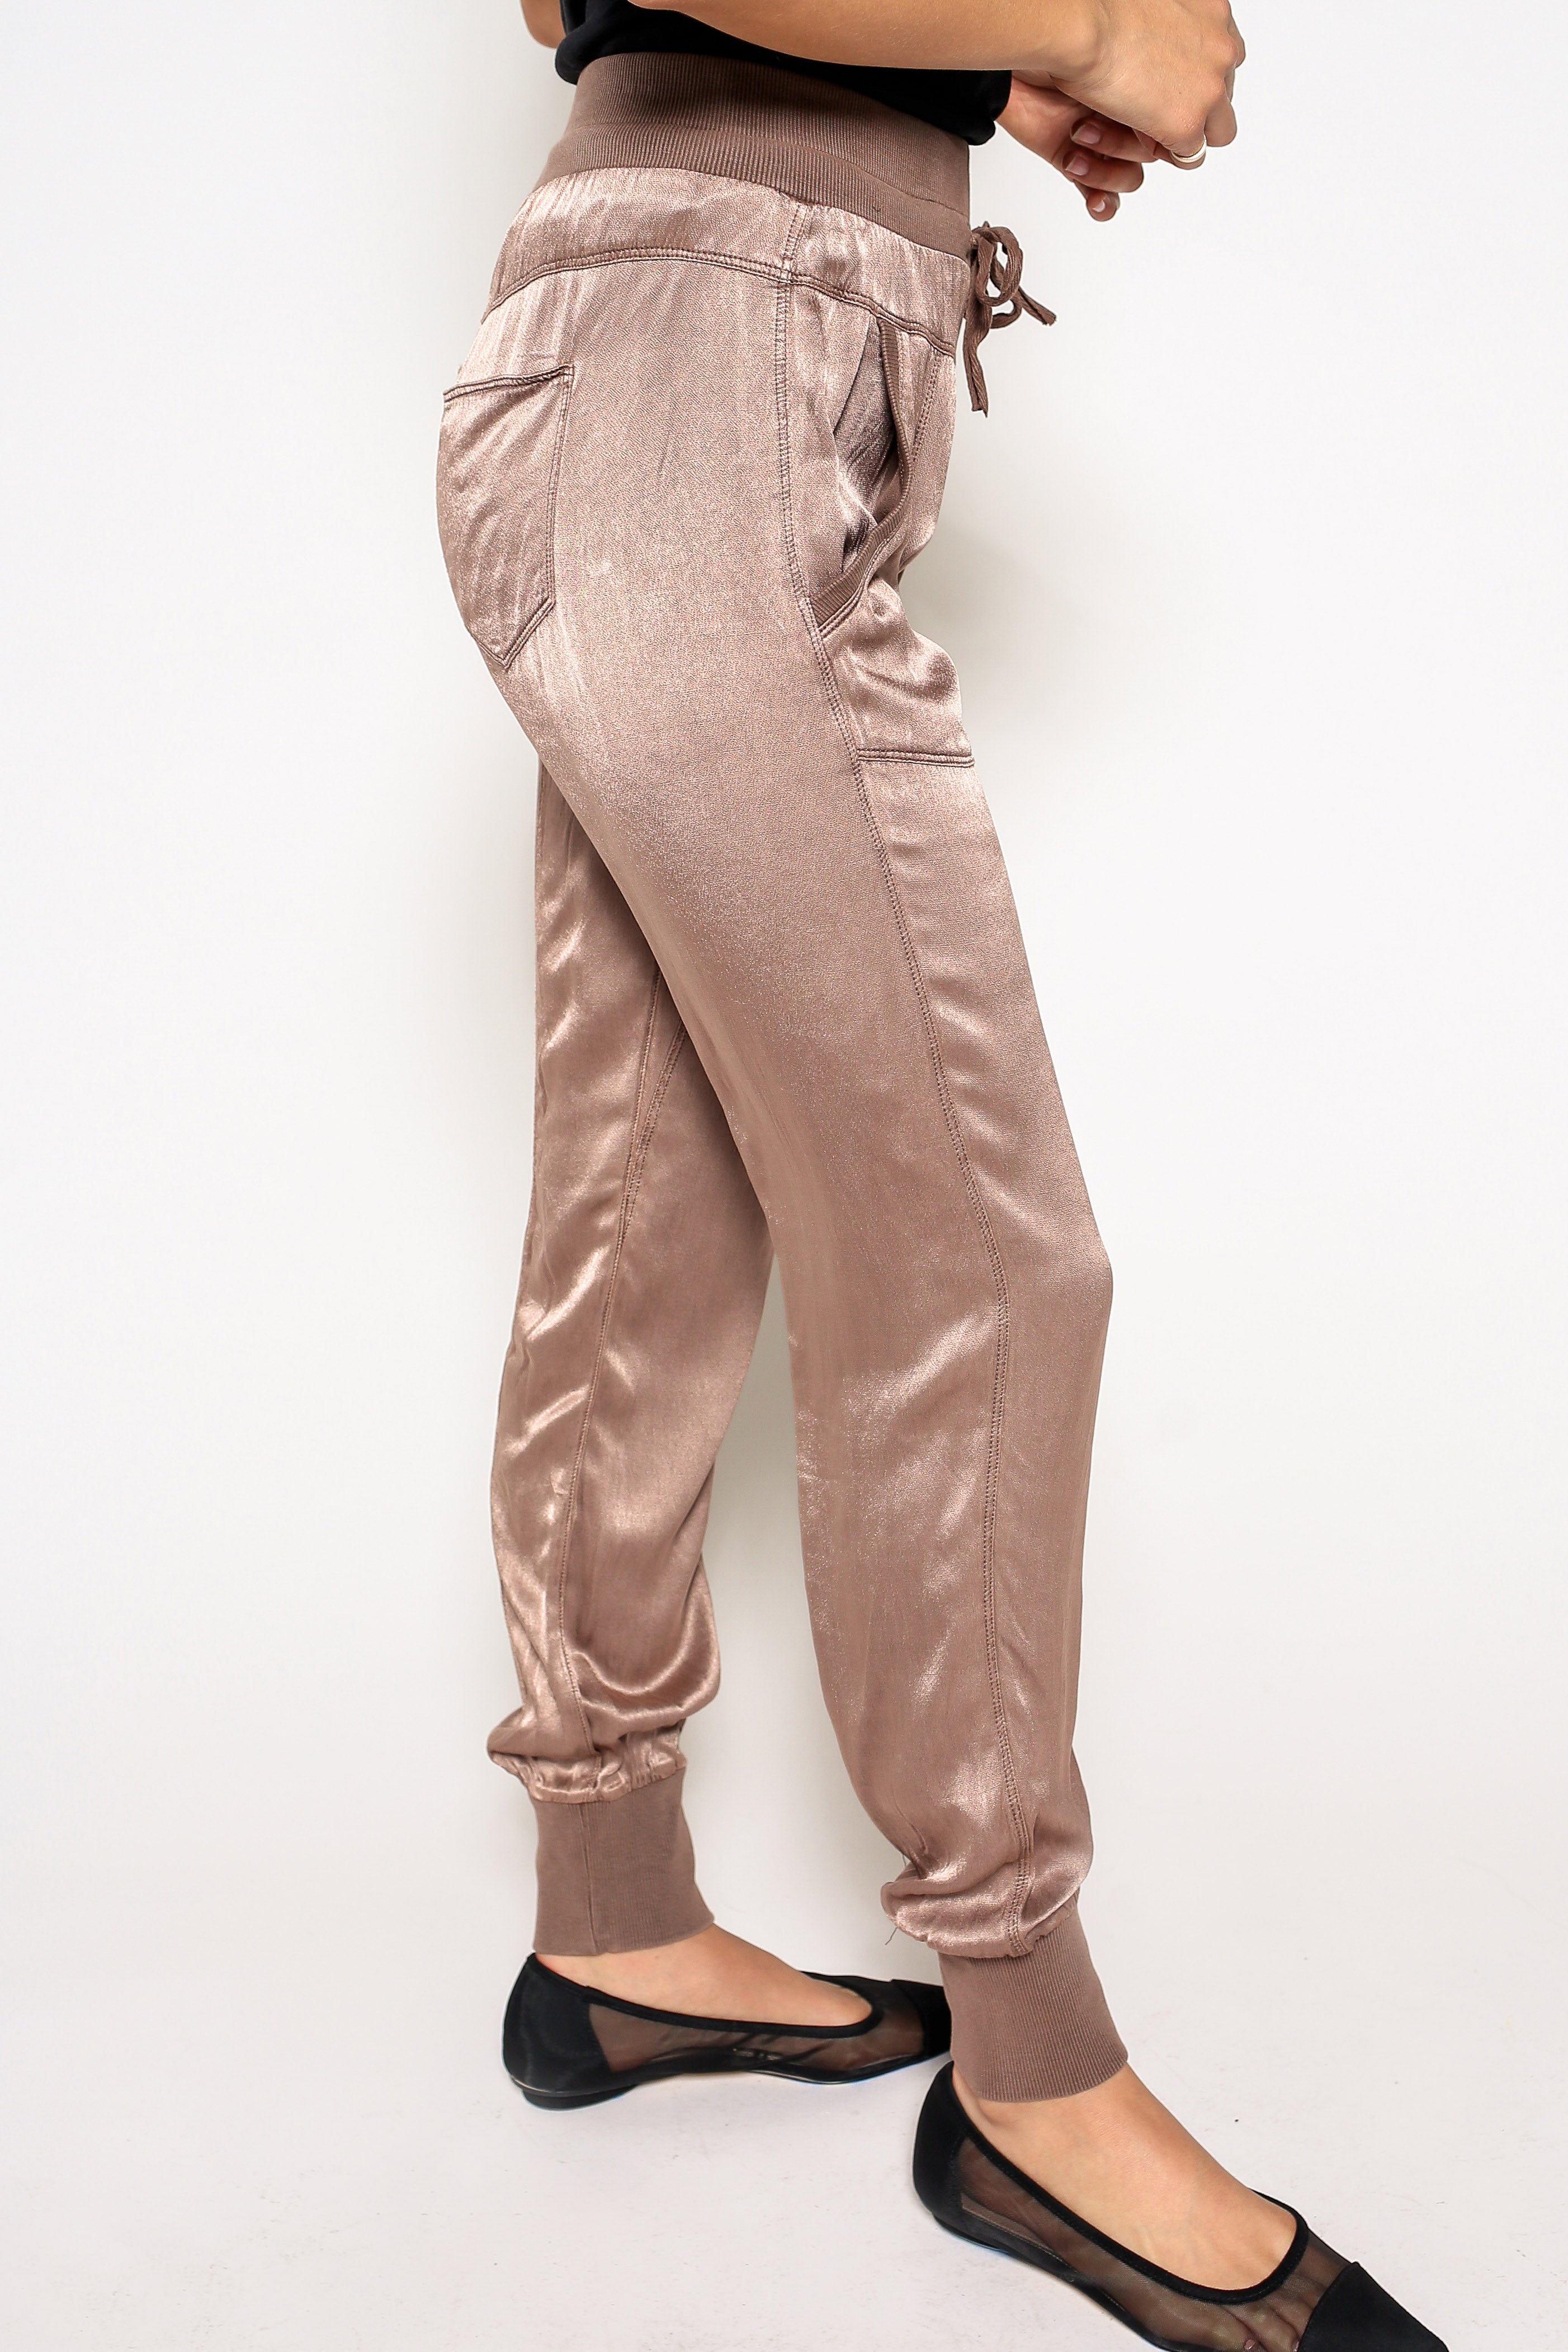 Liam Silky Joggers - Marrakech Clothing